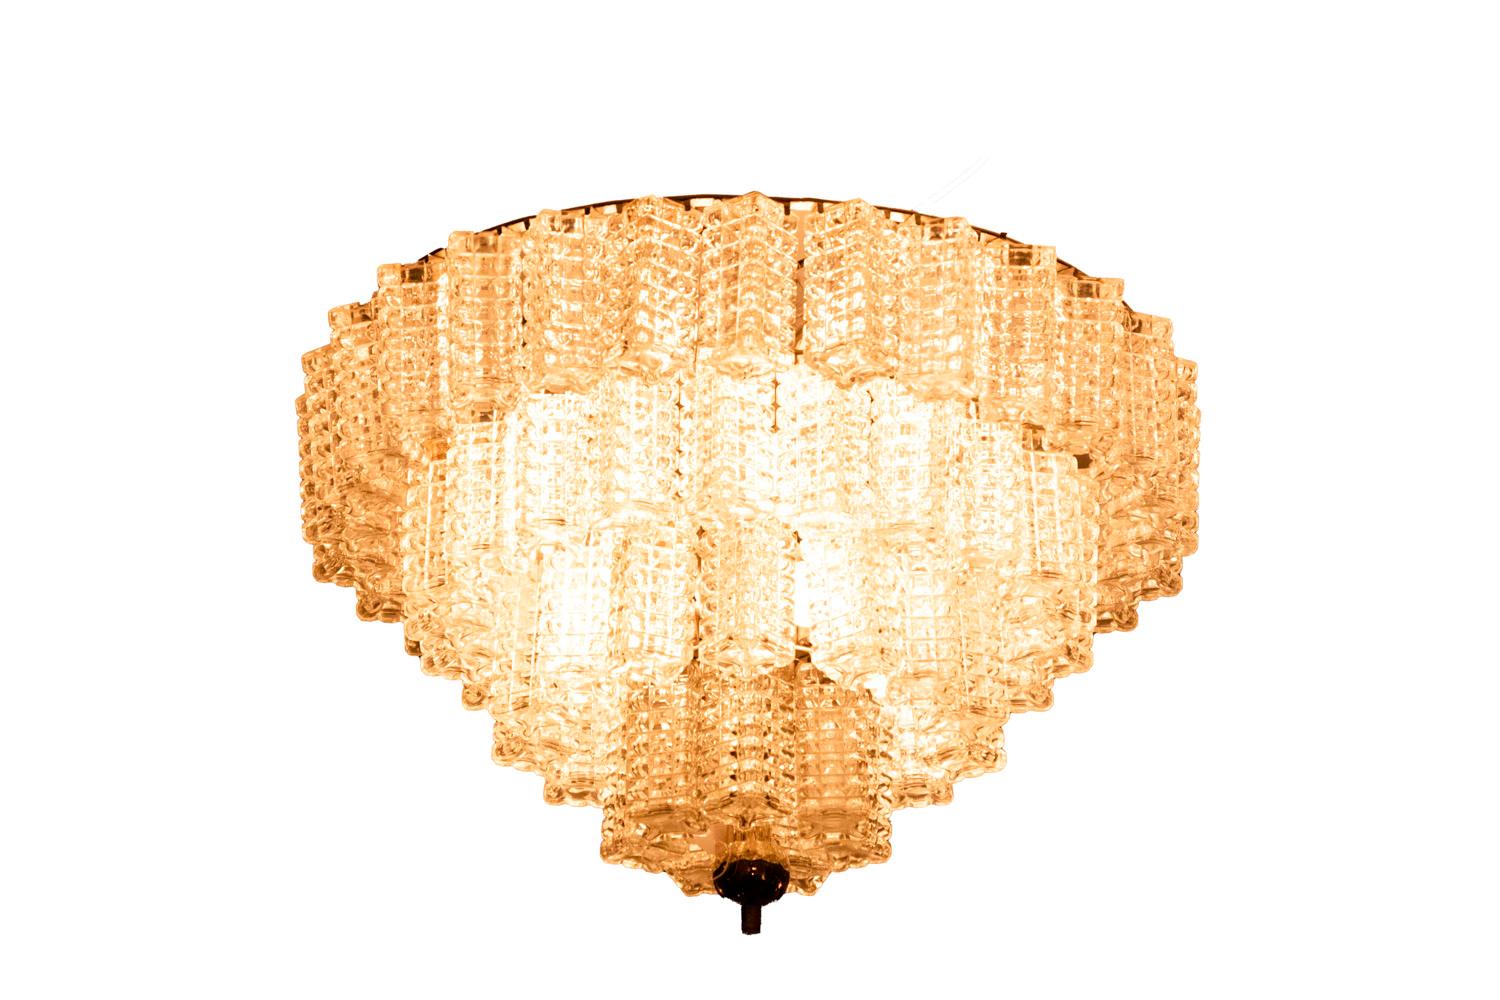 Italian chandelier in parallelepiped glass composed by four ranks that get smaller with glass rectangular tassels with diamond surface. Chandelier ended by a chromed metal sphere.

Italian work realized in the 1960s.

New and functional